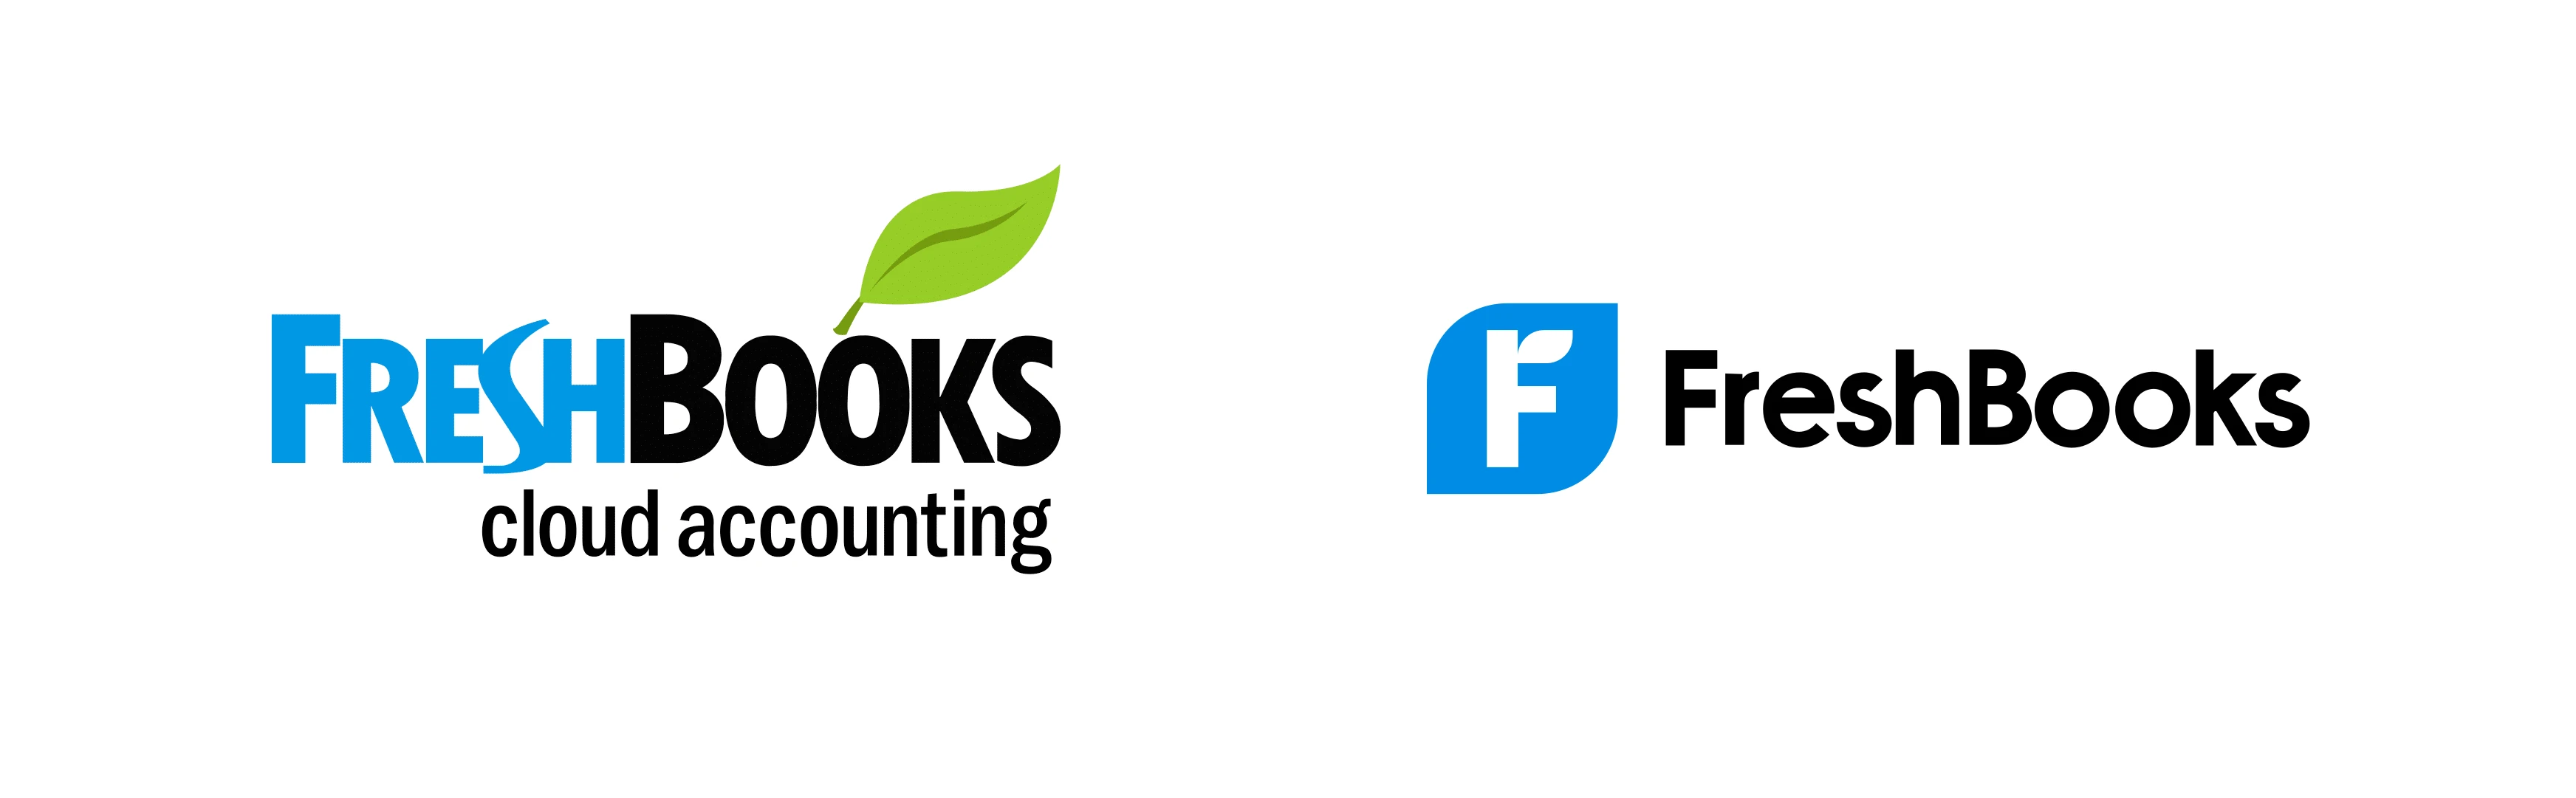 FreshBooks Logos past and present